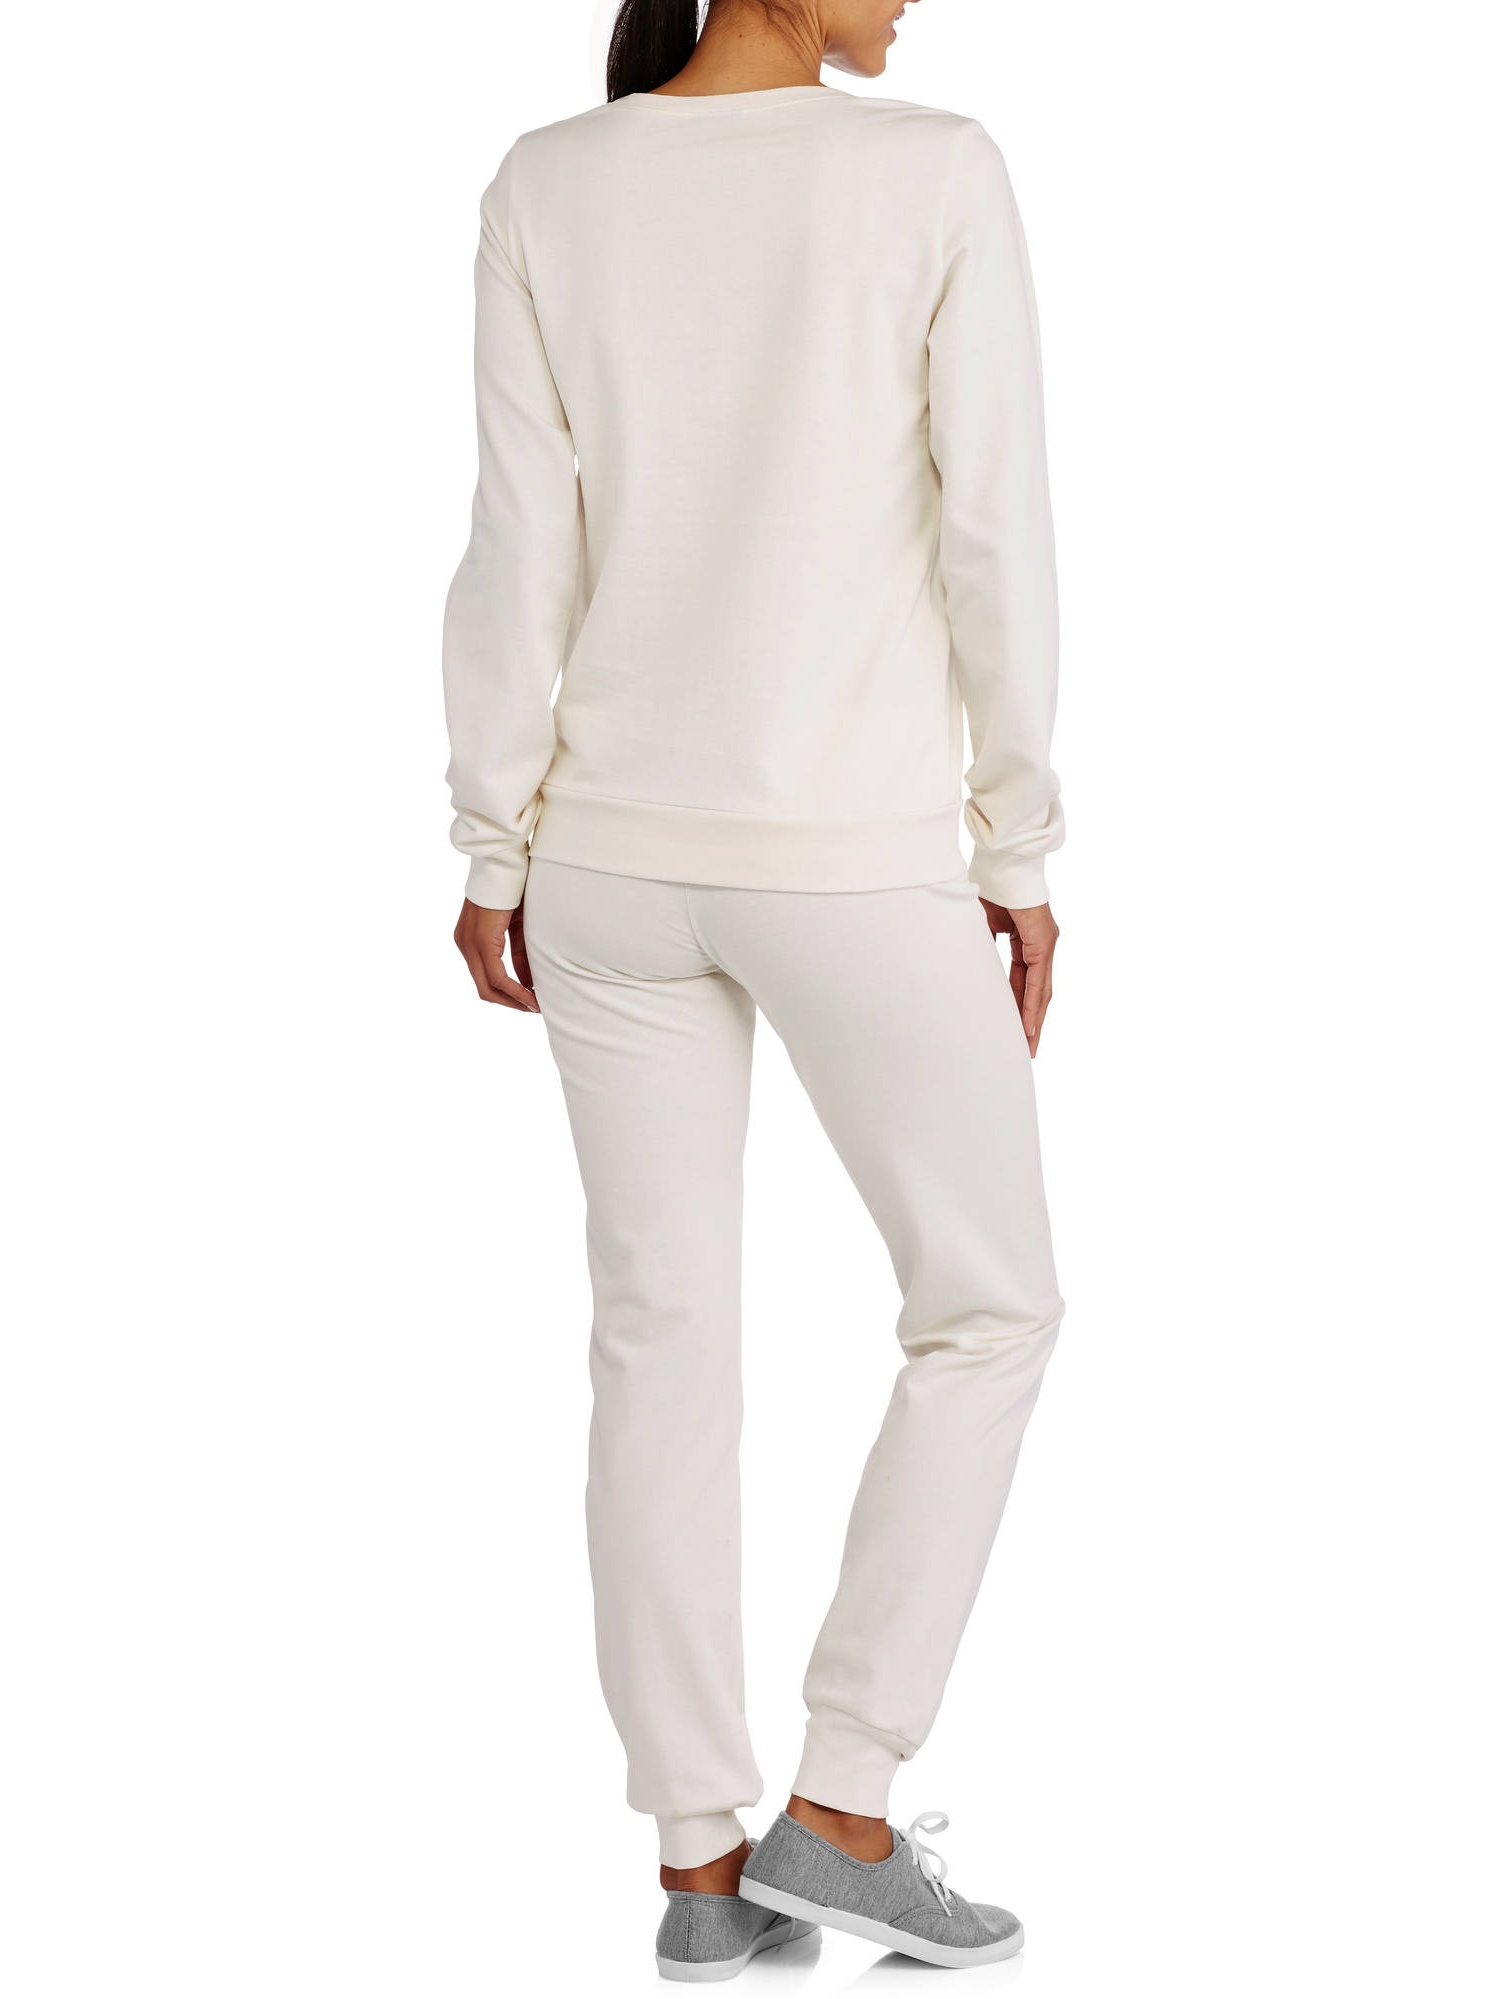 Women's French Terry Graphic Pullover and Jogger Pants Set - image 2 of 2